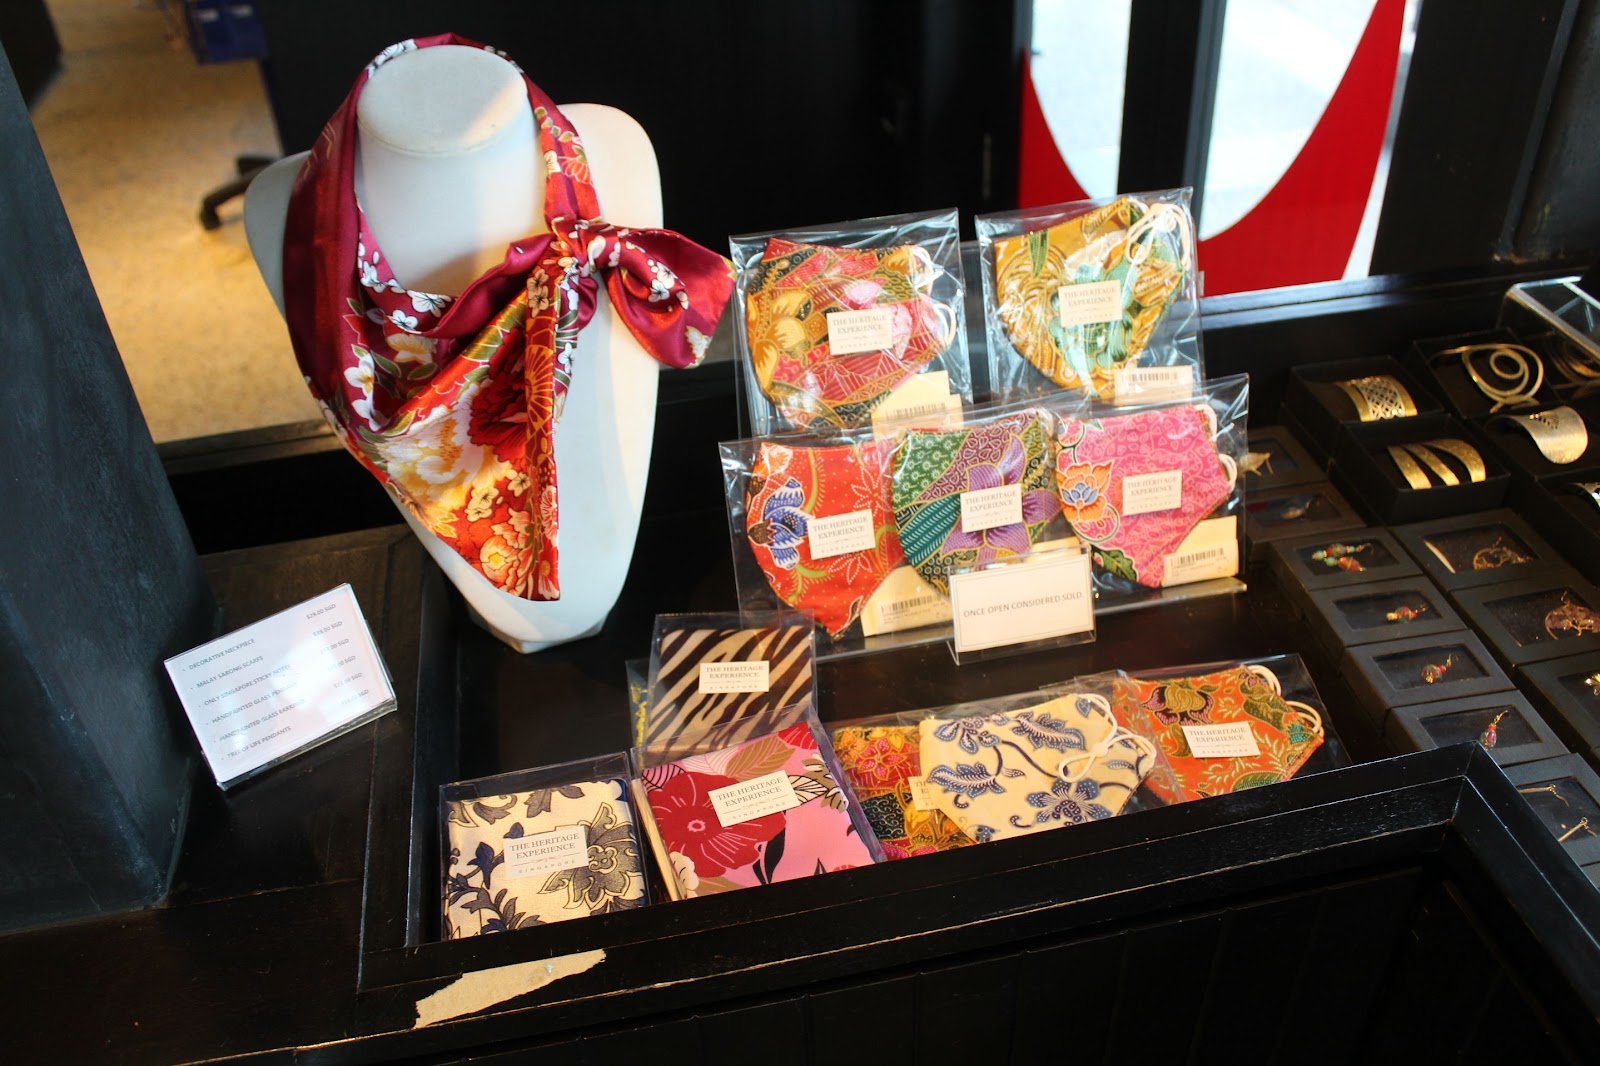 Scarves and souvenirs from the gift shop